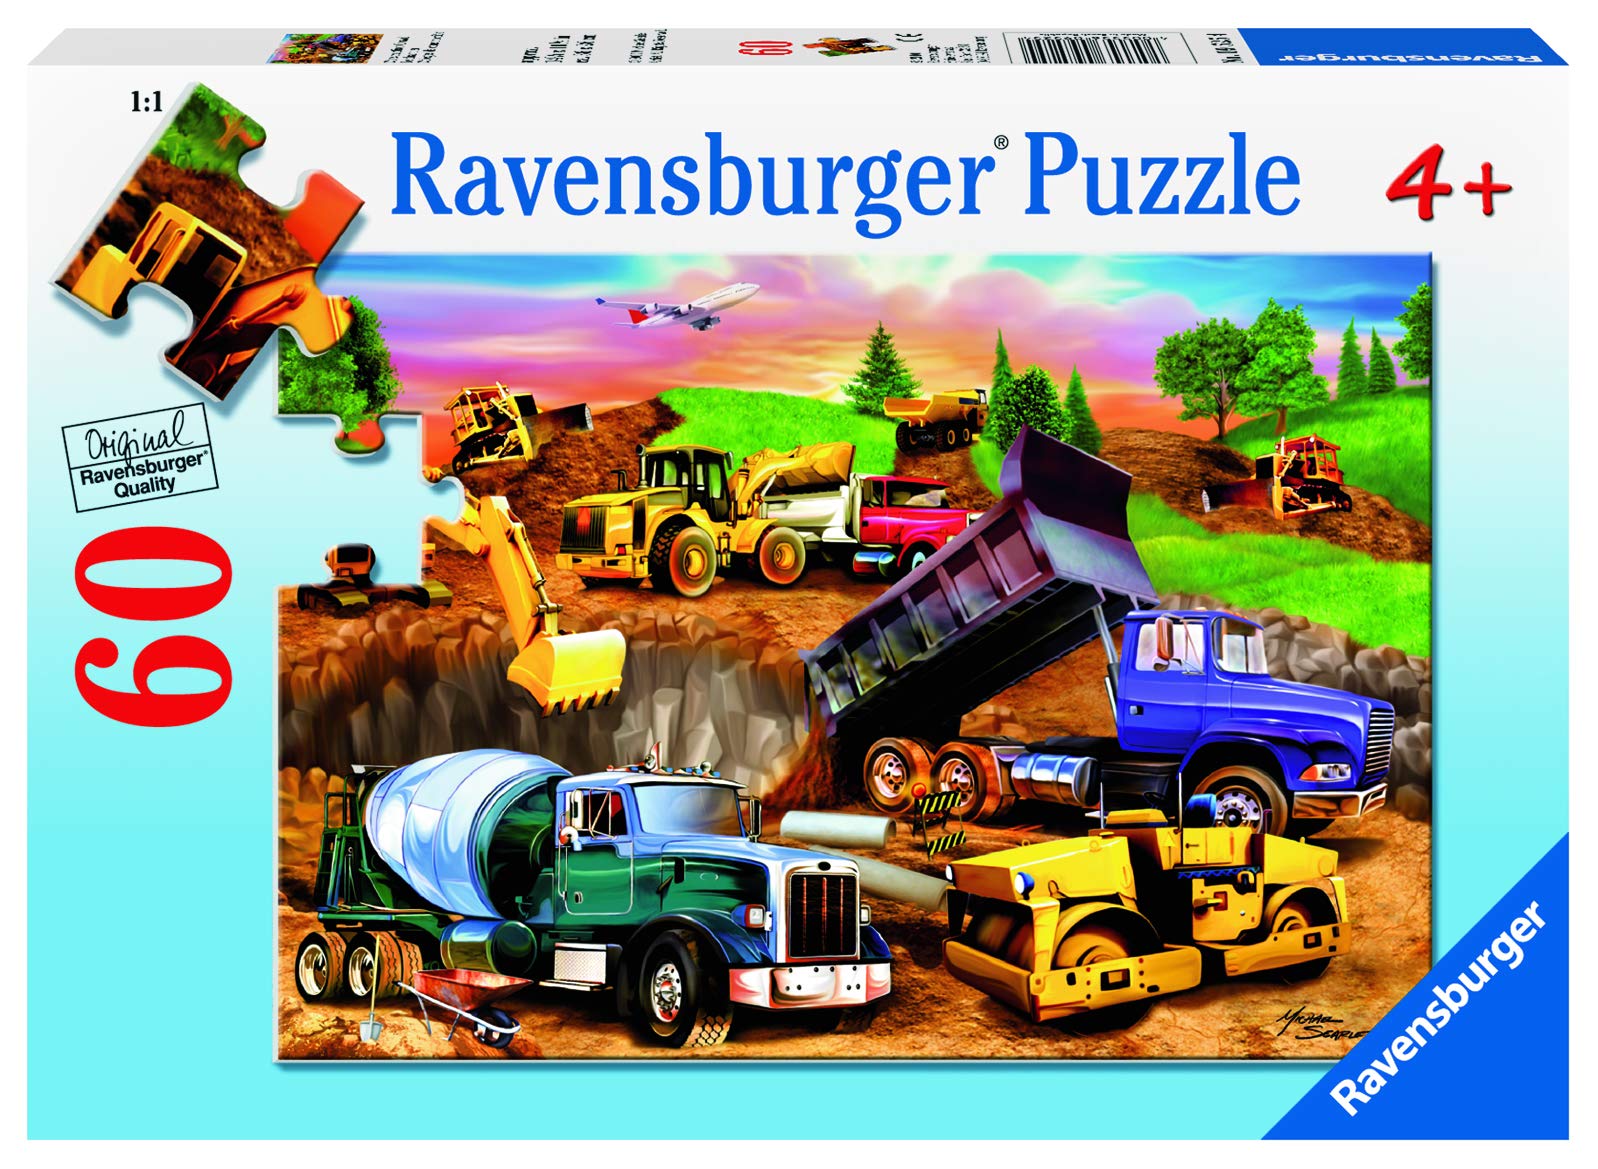 Ravensburger Construction Crowd - 60 Piece Jigsaw Puzzle for Kids – Every Piece is Unique, Pieces Fit Together Perfectly